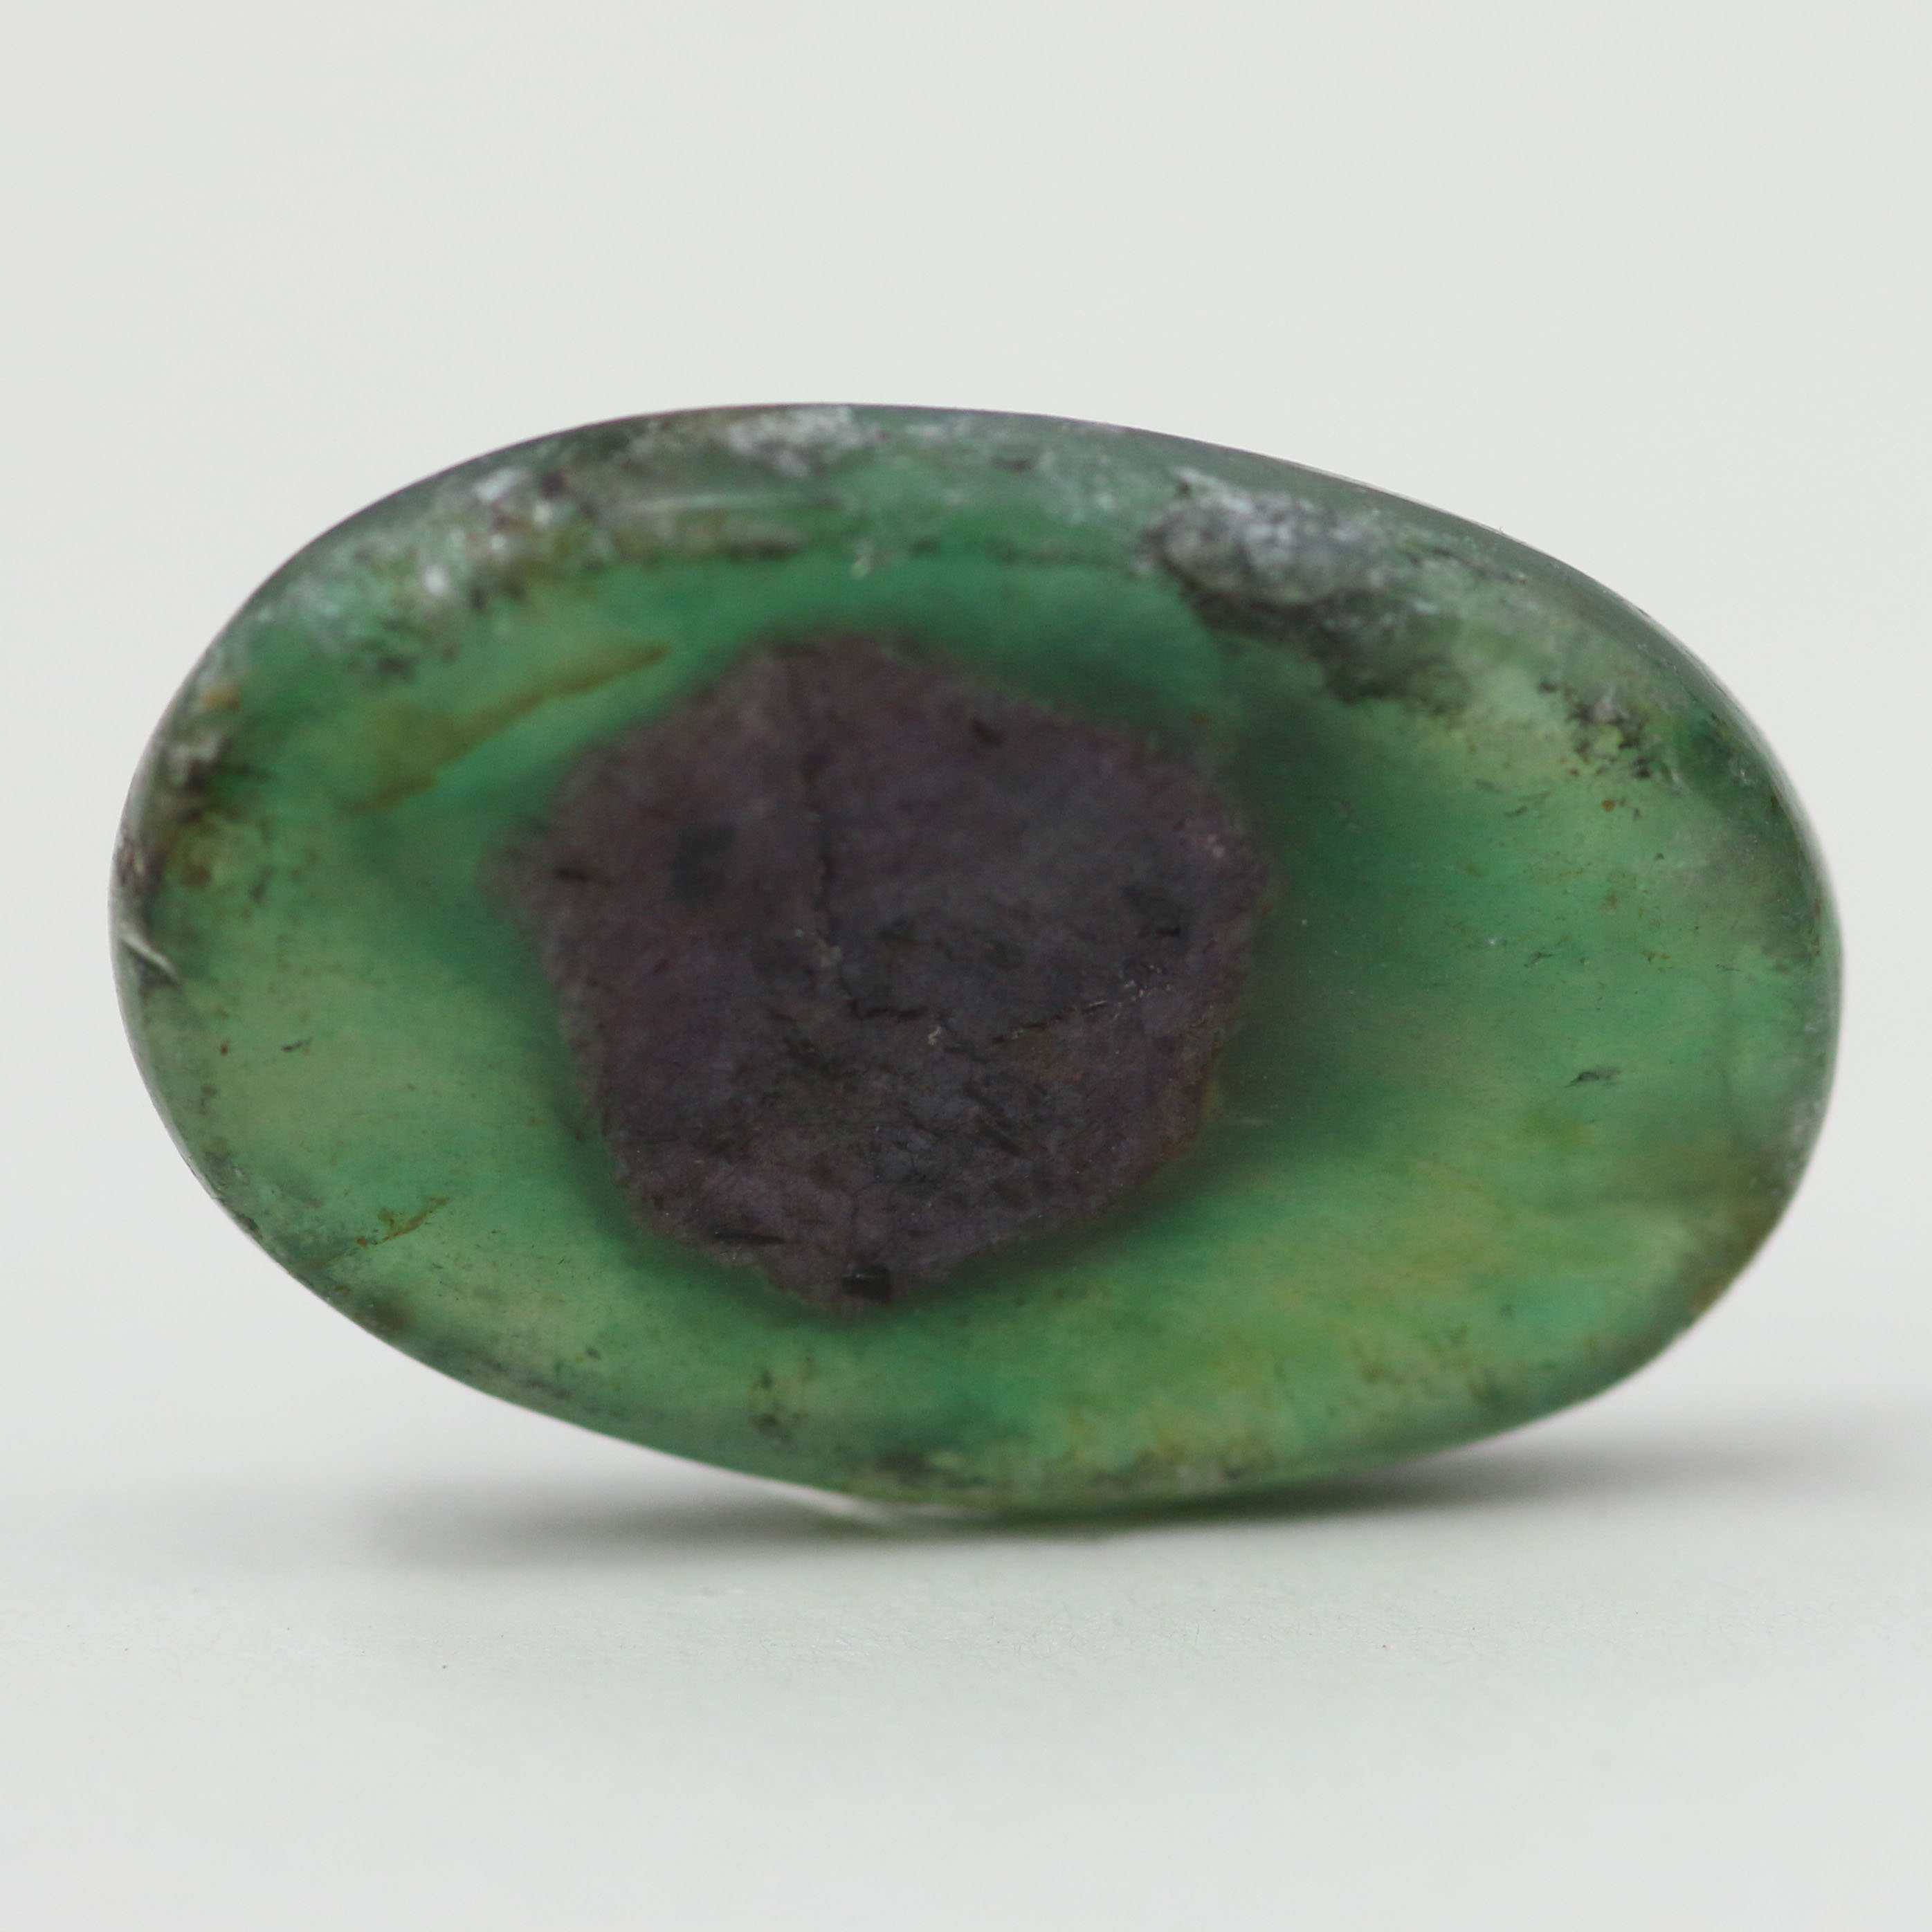 RUBY & ZOISITE 19X12 OVAL 7.78CT